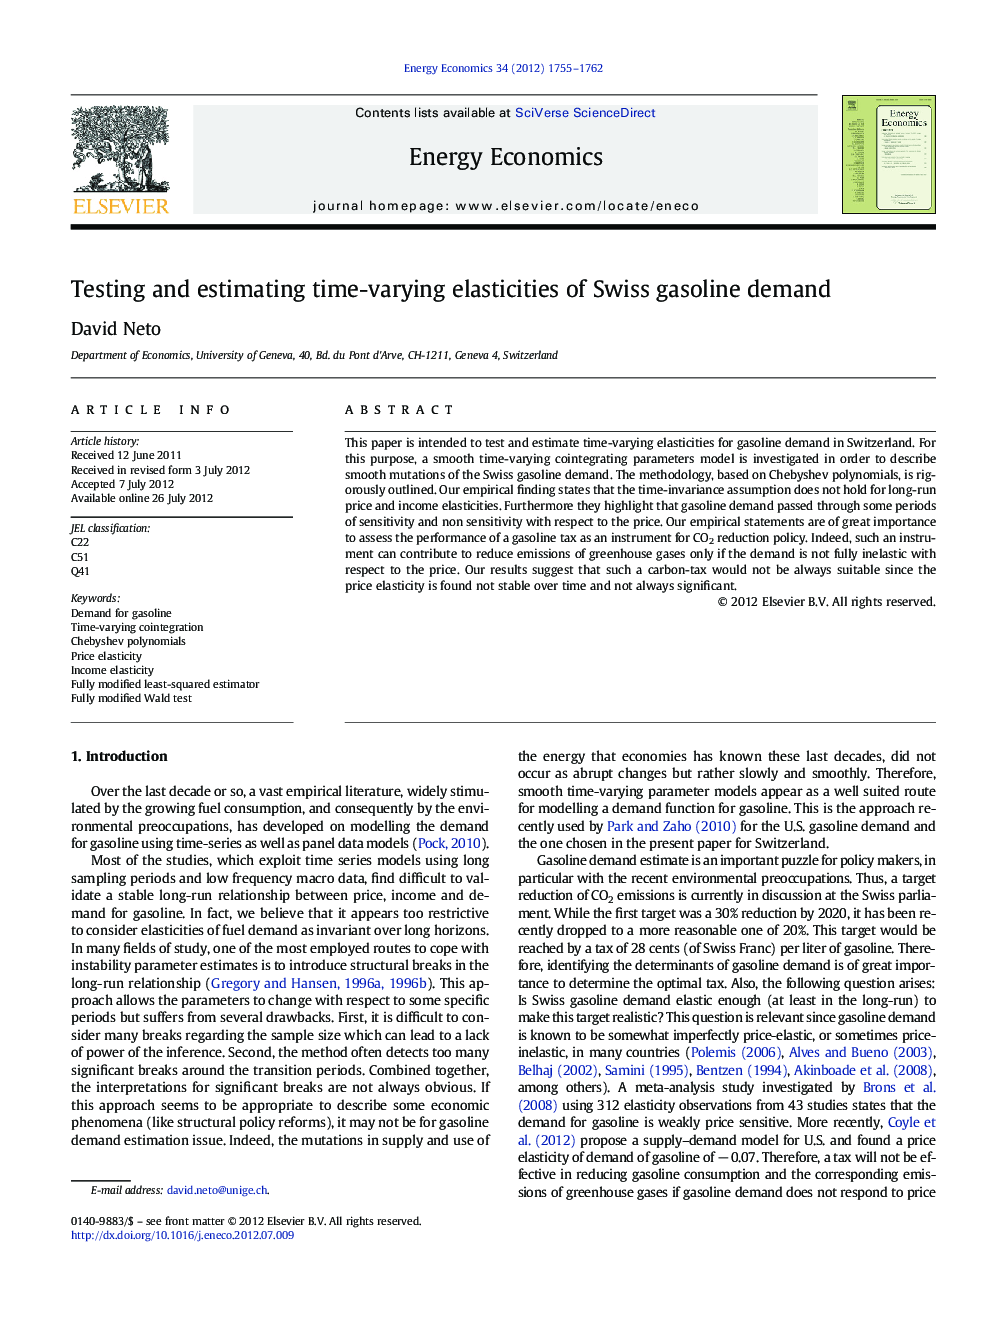 Testing and estimating time-varying elasticities of Swiss gasoline demand